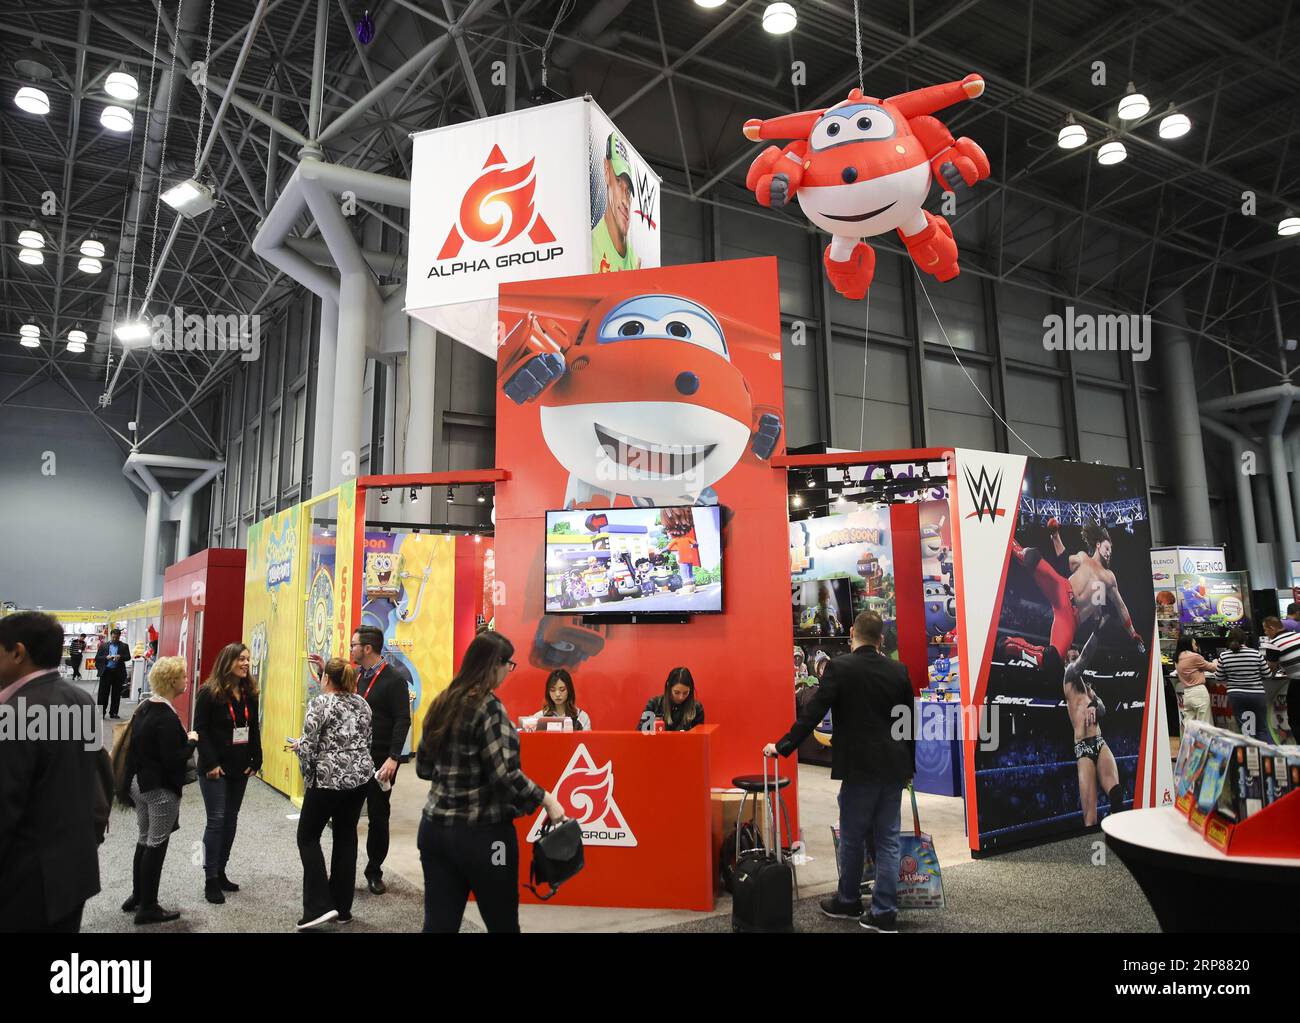 (190221) -- NEW YORK, Feb. 21, 2019 -- A cartoon character of Super Wings is seen at the booth of Alpha Group Co., Ltd., a major animation, toy and entertainment player from Guangdong Province in southern China, during the 116th Annual North American International Toy Fair at the Jacob K. Javits Convention Center in New York, the United States, Feb. 19, 2019. Chinese toy manufacturers, which produce around 75 percent of global toys each year, are rising up the value chain from the original role as contract manufacturers to designers and makers of their own brands. ) U.S.-NEW YORK-CHINESE TOY P Stock Photo